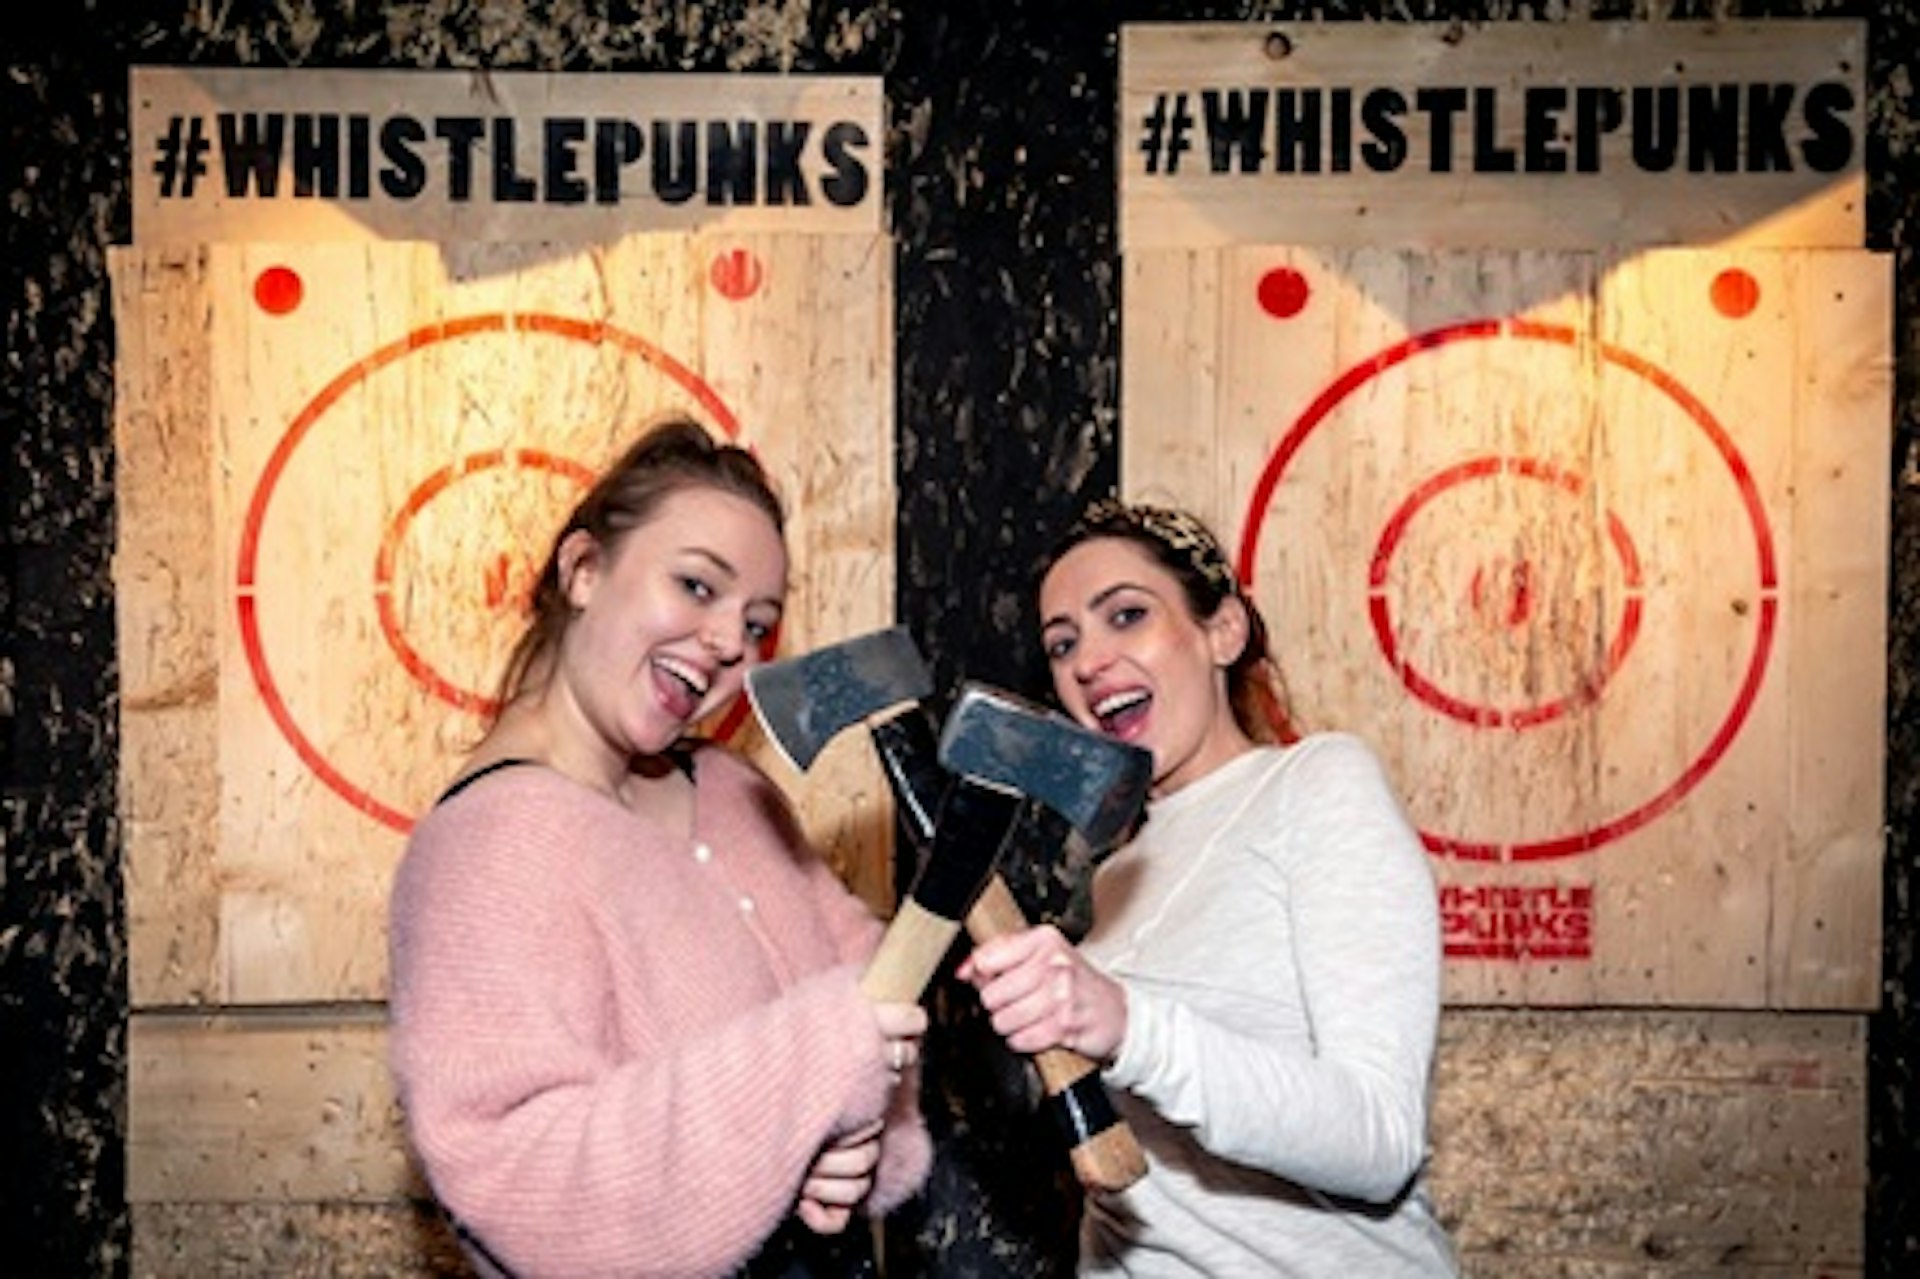 Urban Axe Throwing for Two at Whistle Punks, Leeds, Manchester or Bristol 1